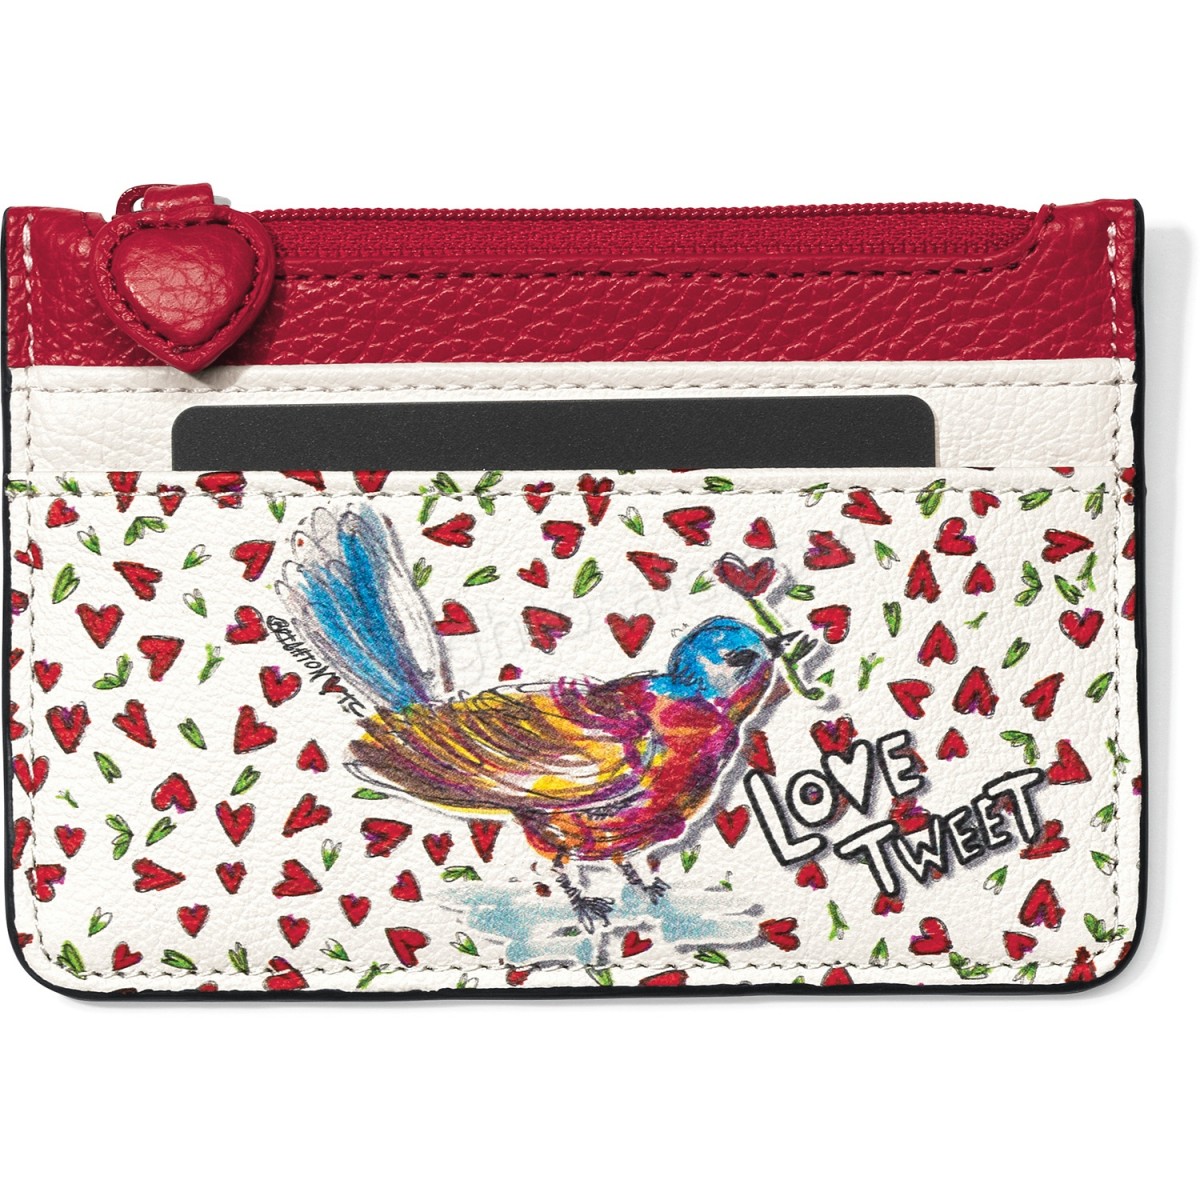 Brighton Collectibles & Online Discount Crazy Love Bright Cross Body Pouch - -1